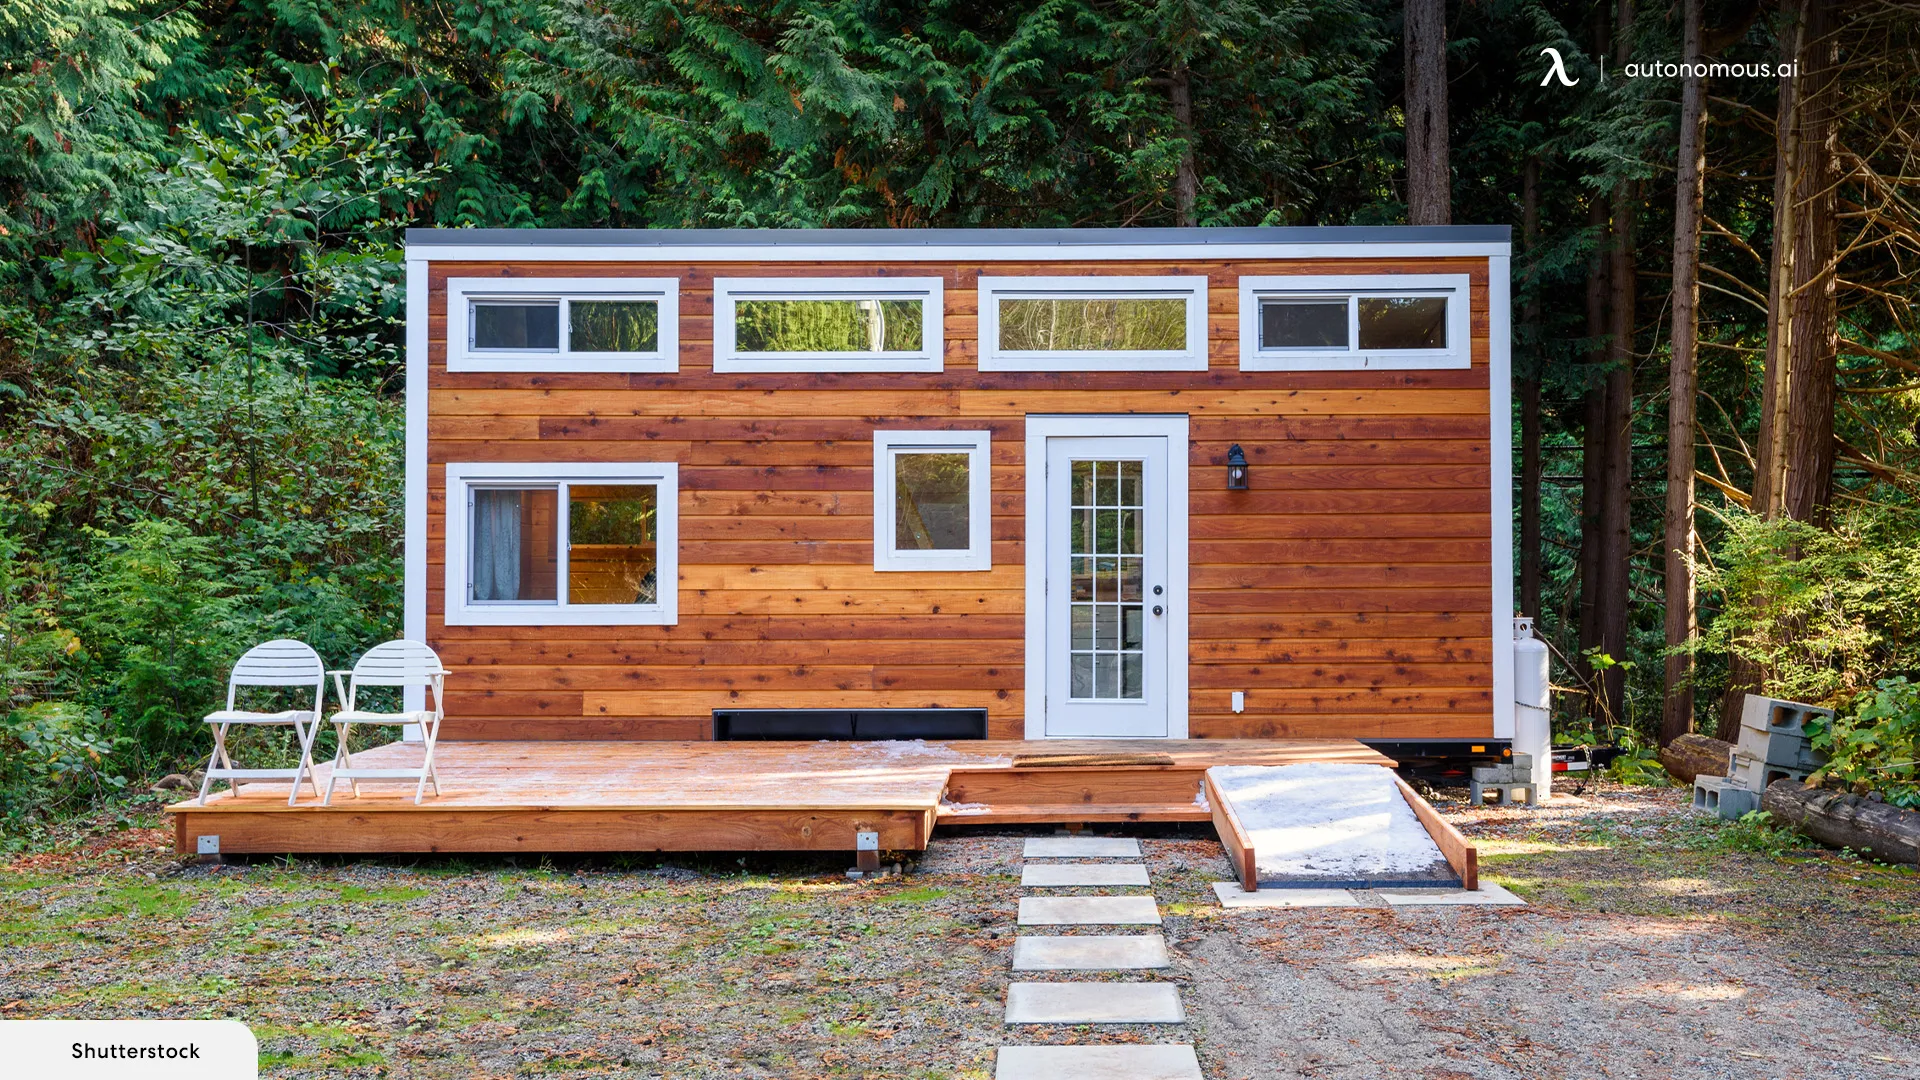 Key Insights to Take Away from Tiny Home Design